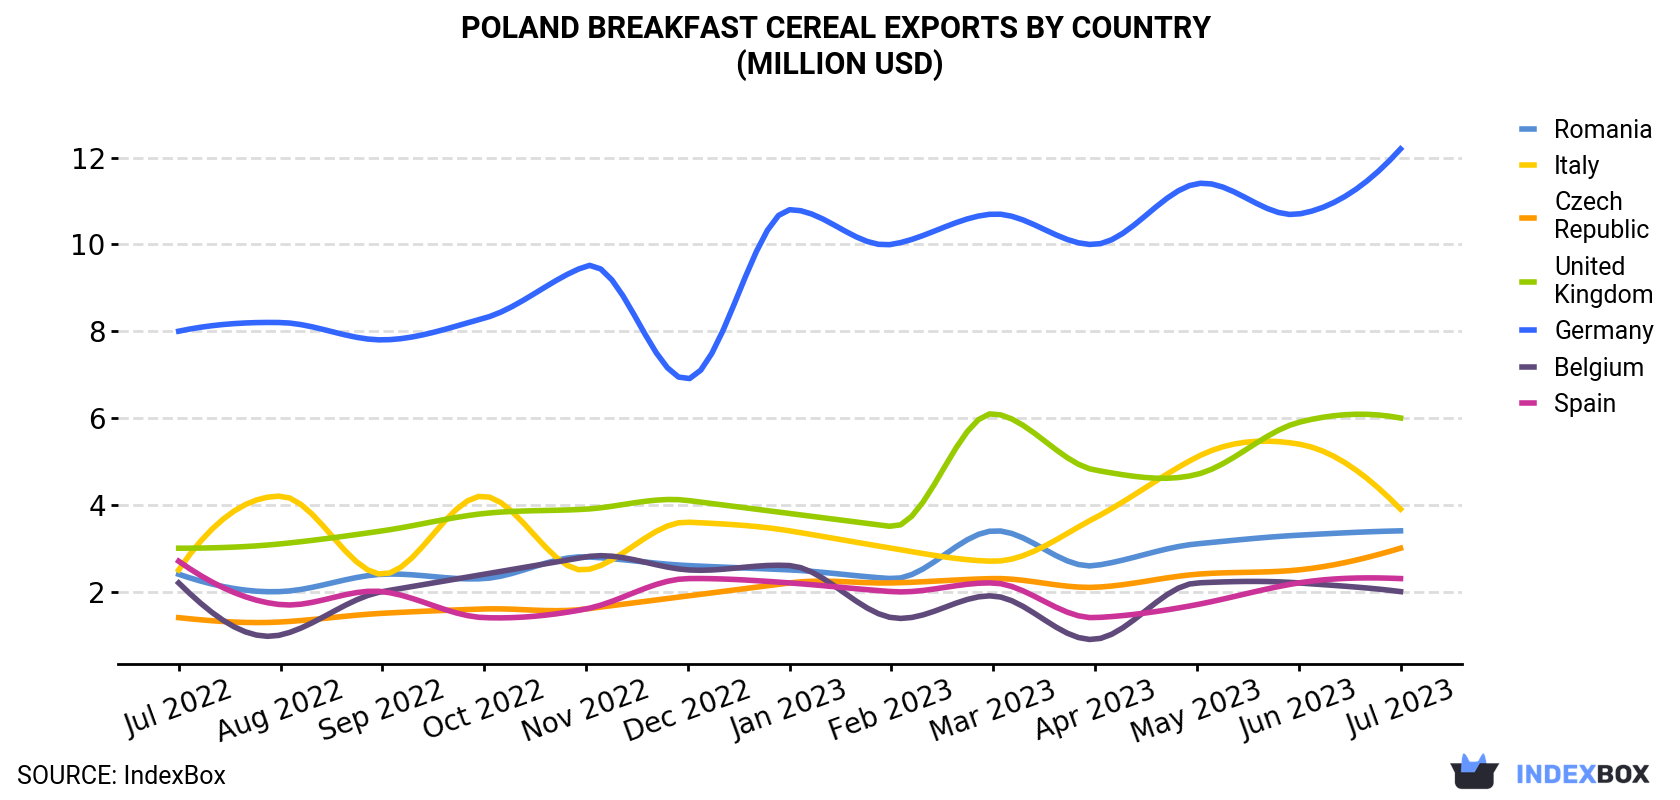 Poland Breakfast Cereal Exports By Country (Million USD)